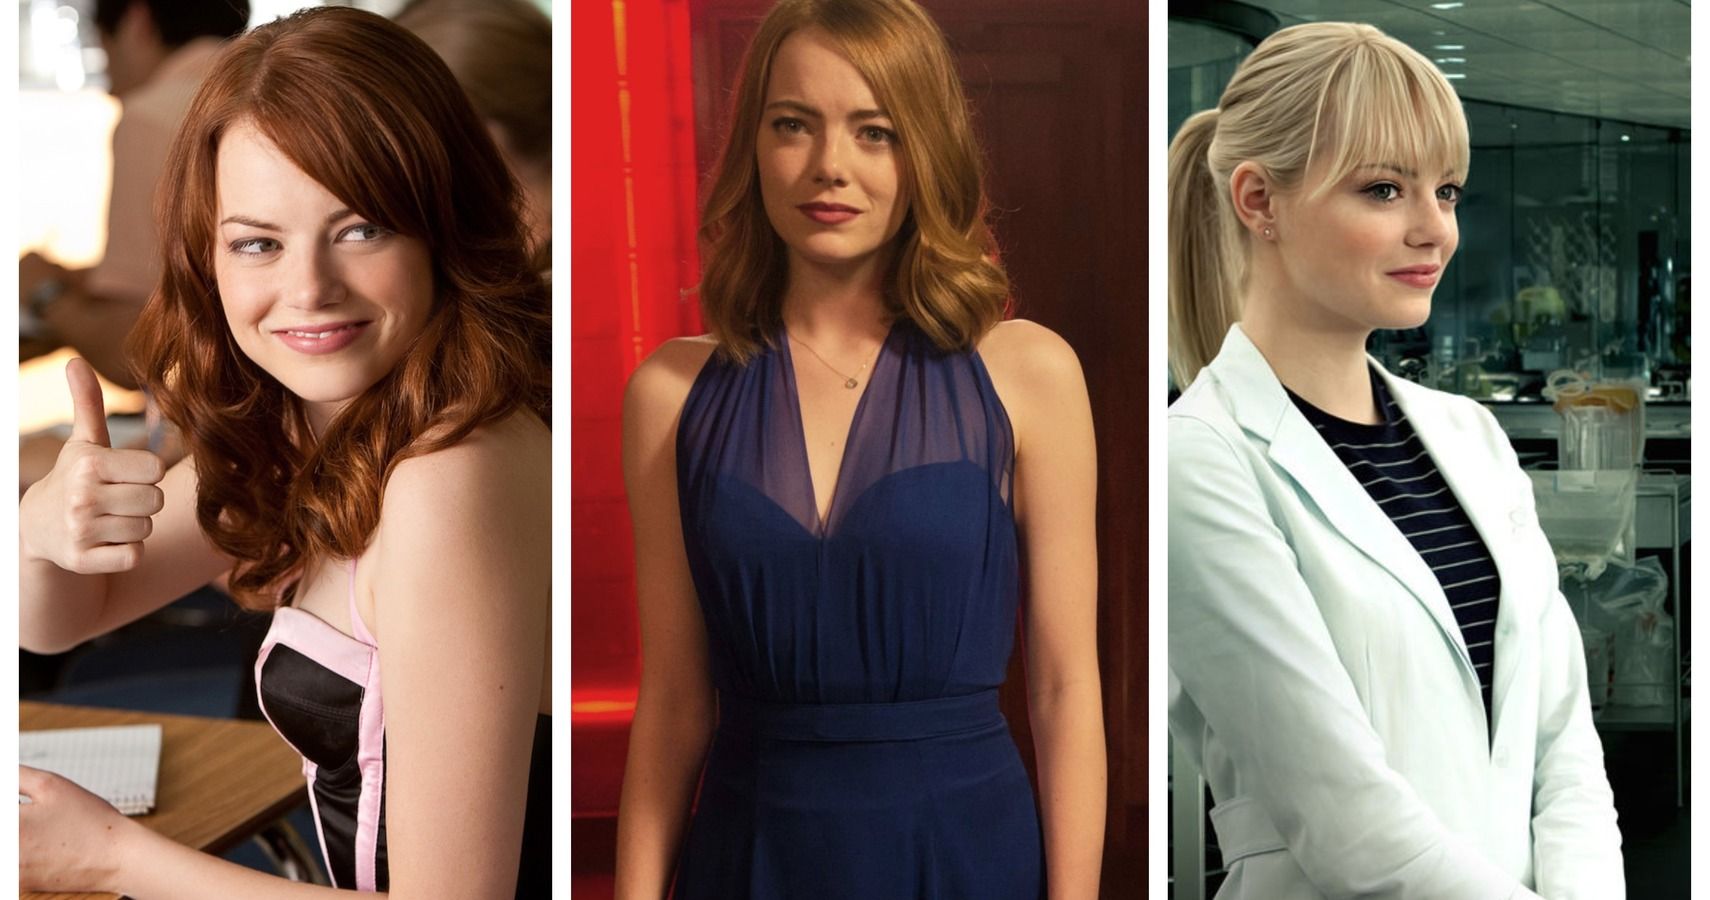 Emma Stones 10 Most Memorable Roles Ranked From Most Quirky to Most Serious